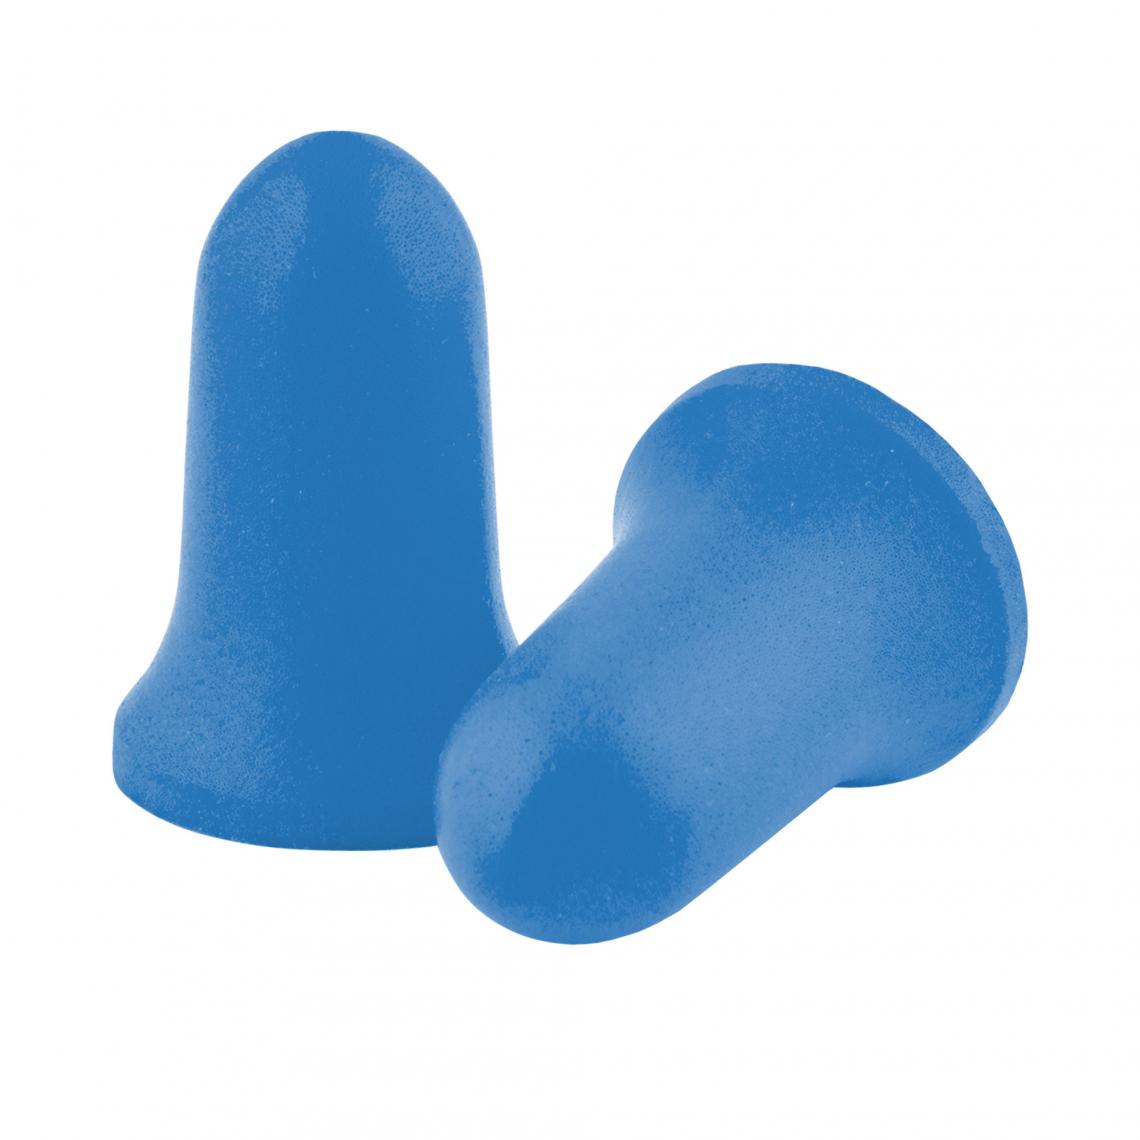 H SERIES™ Disposable Soft Foam Uncorded Earplugs - Box of 200 Pairs